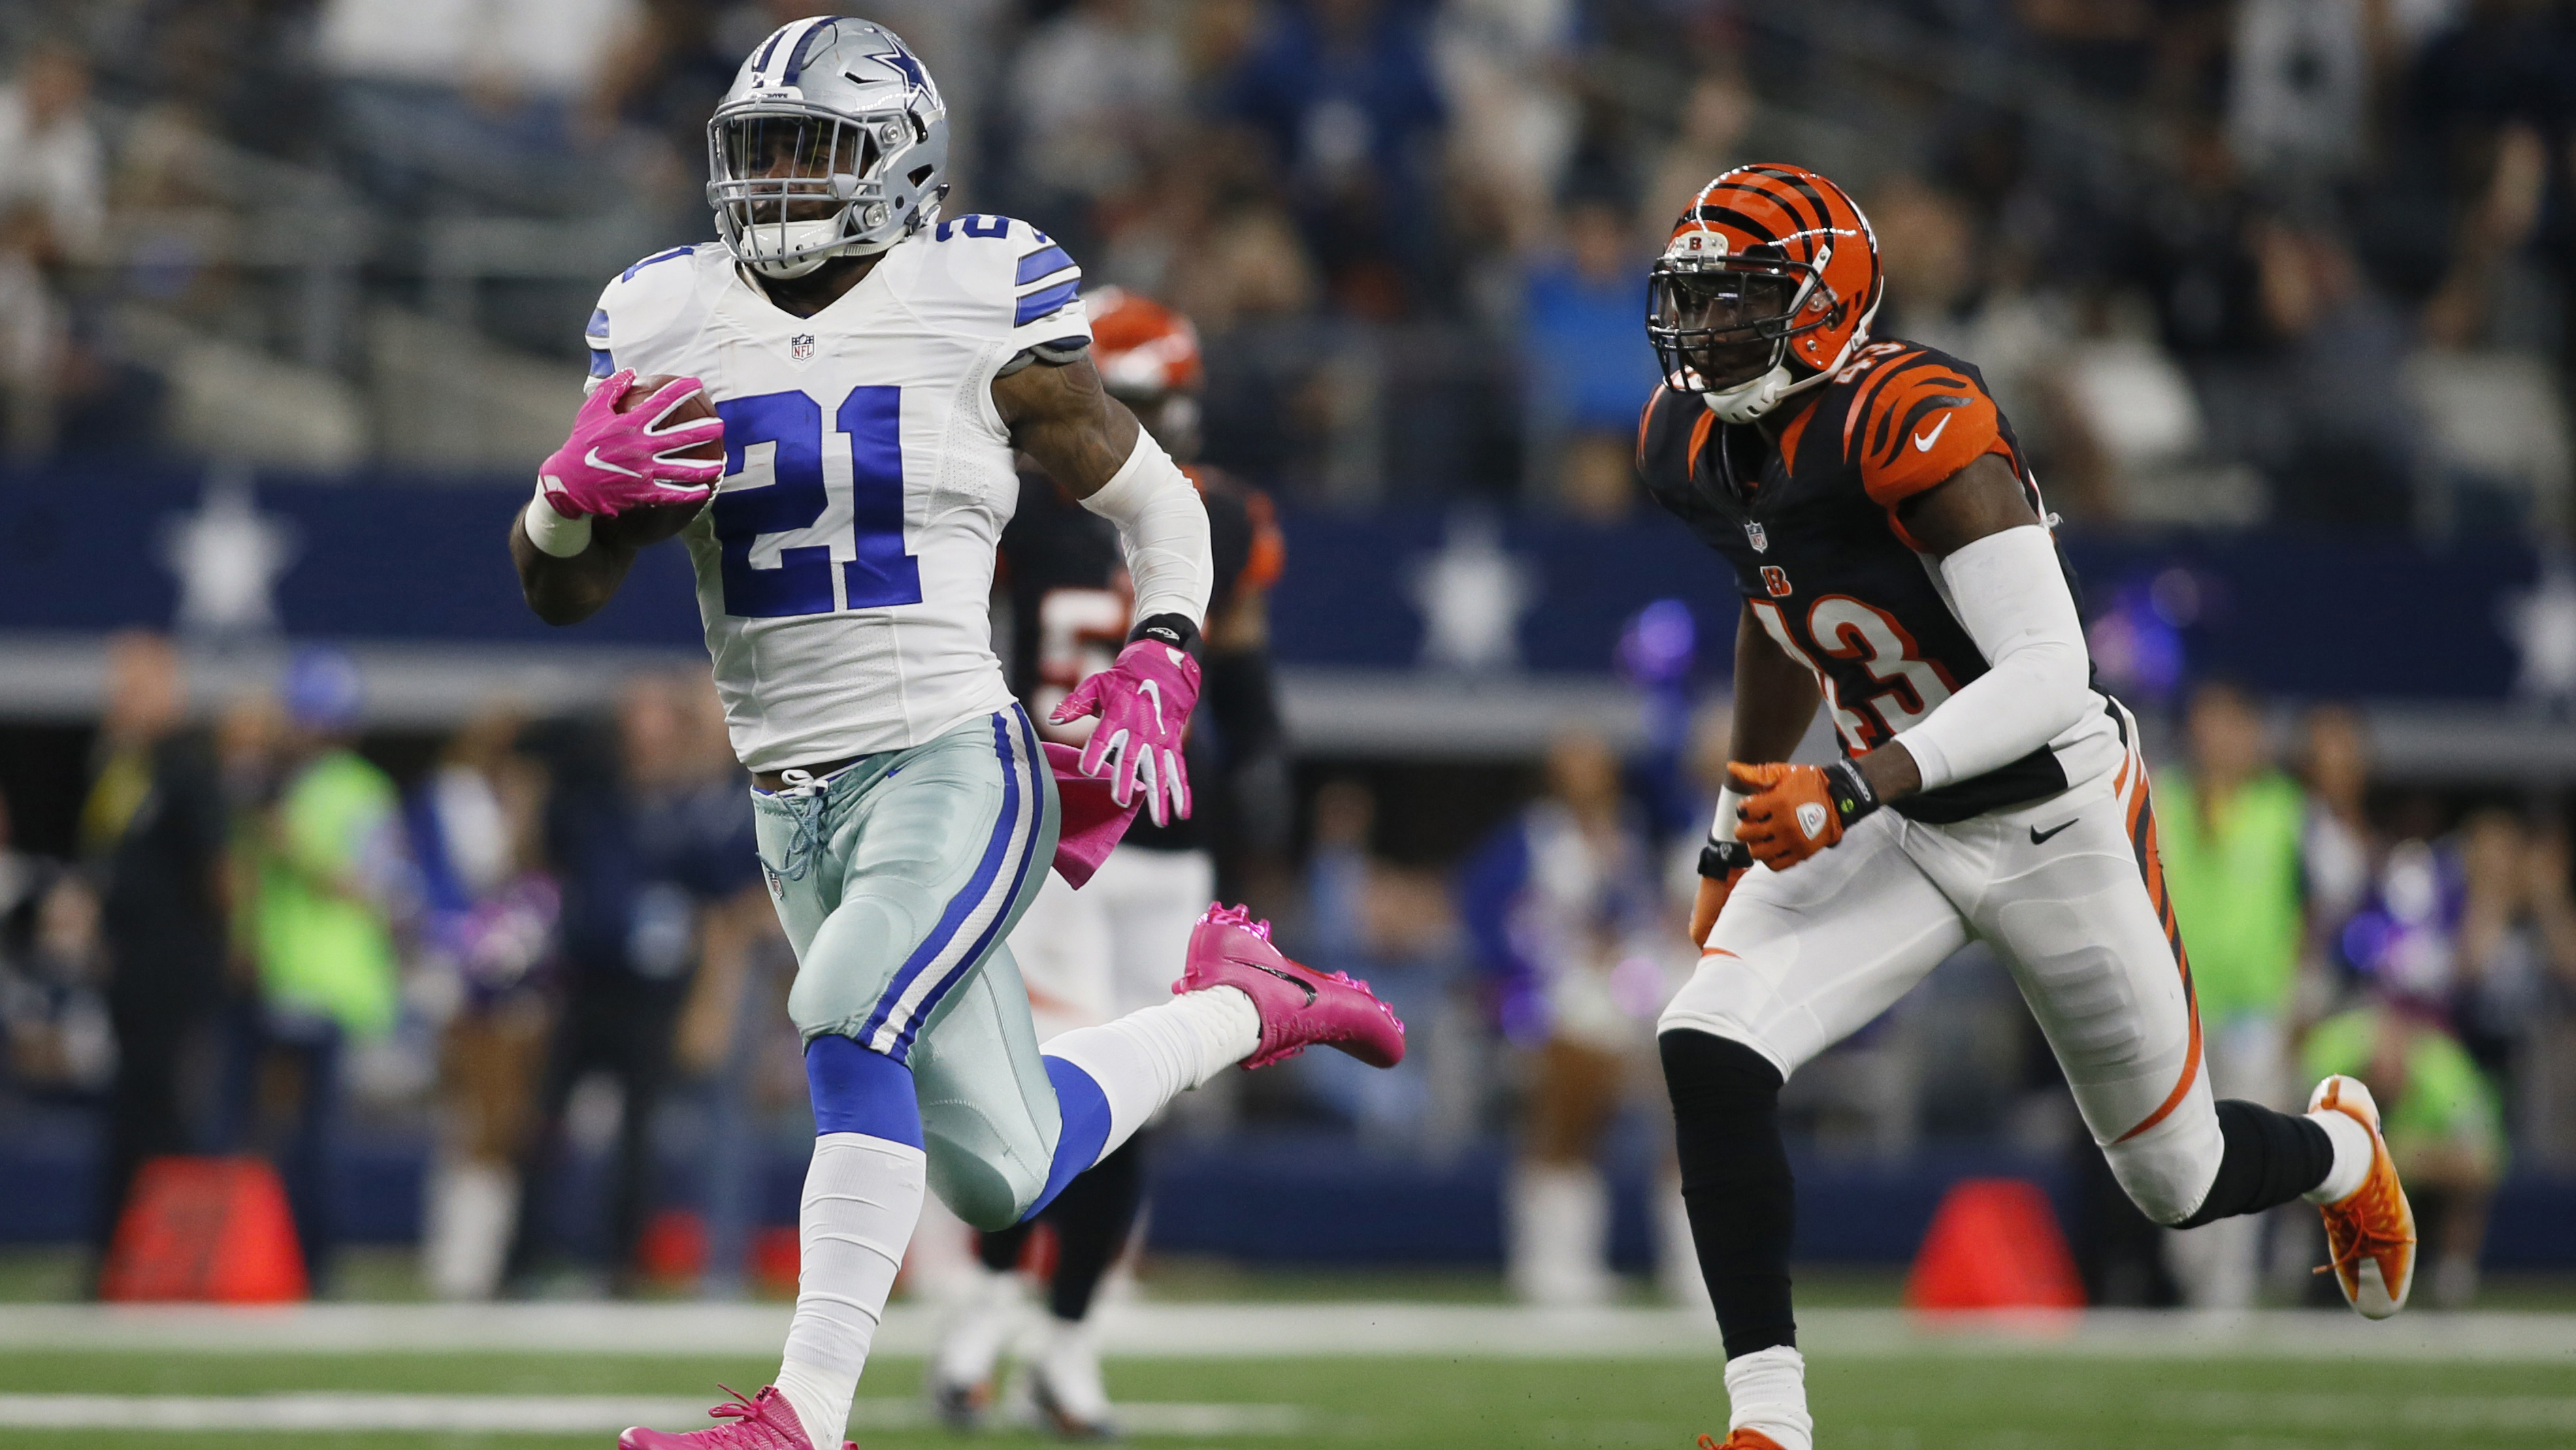 Live blog: Cowboys roll to 28-14 win over Bengals